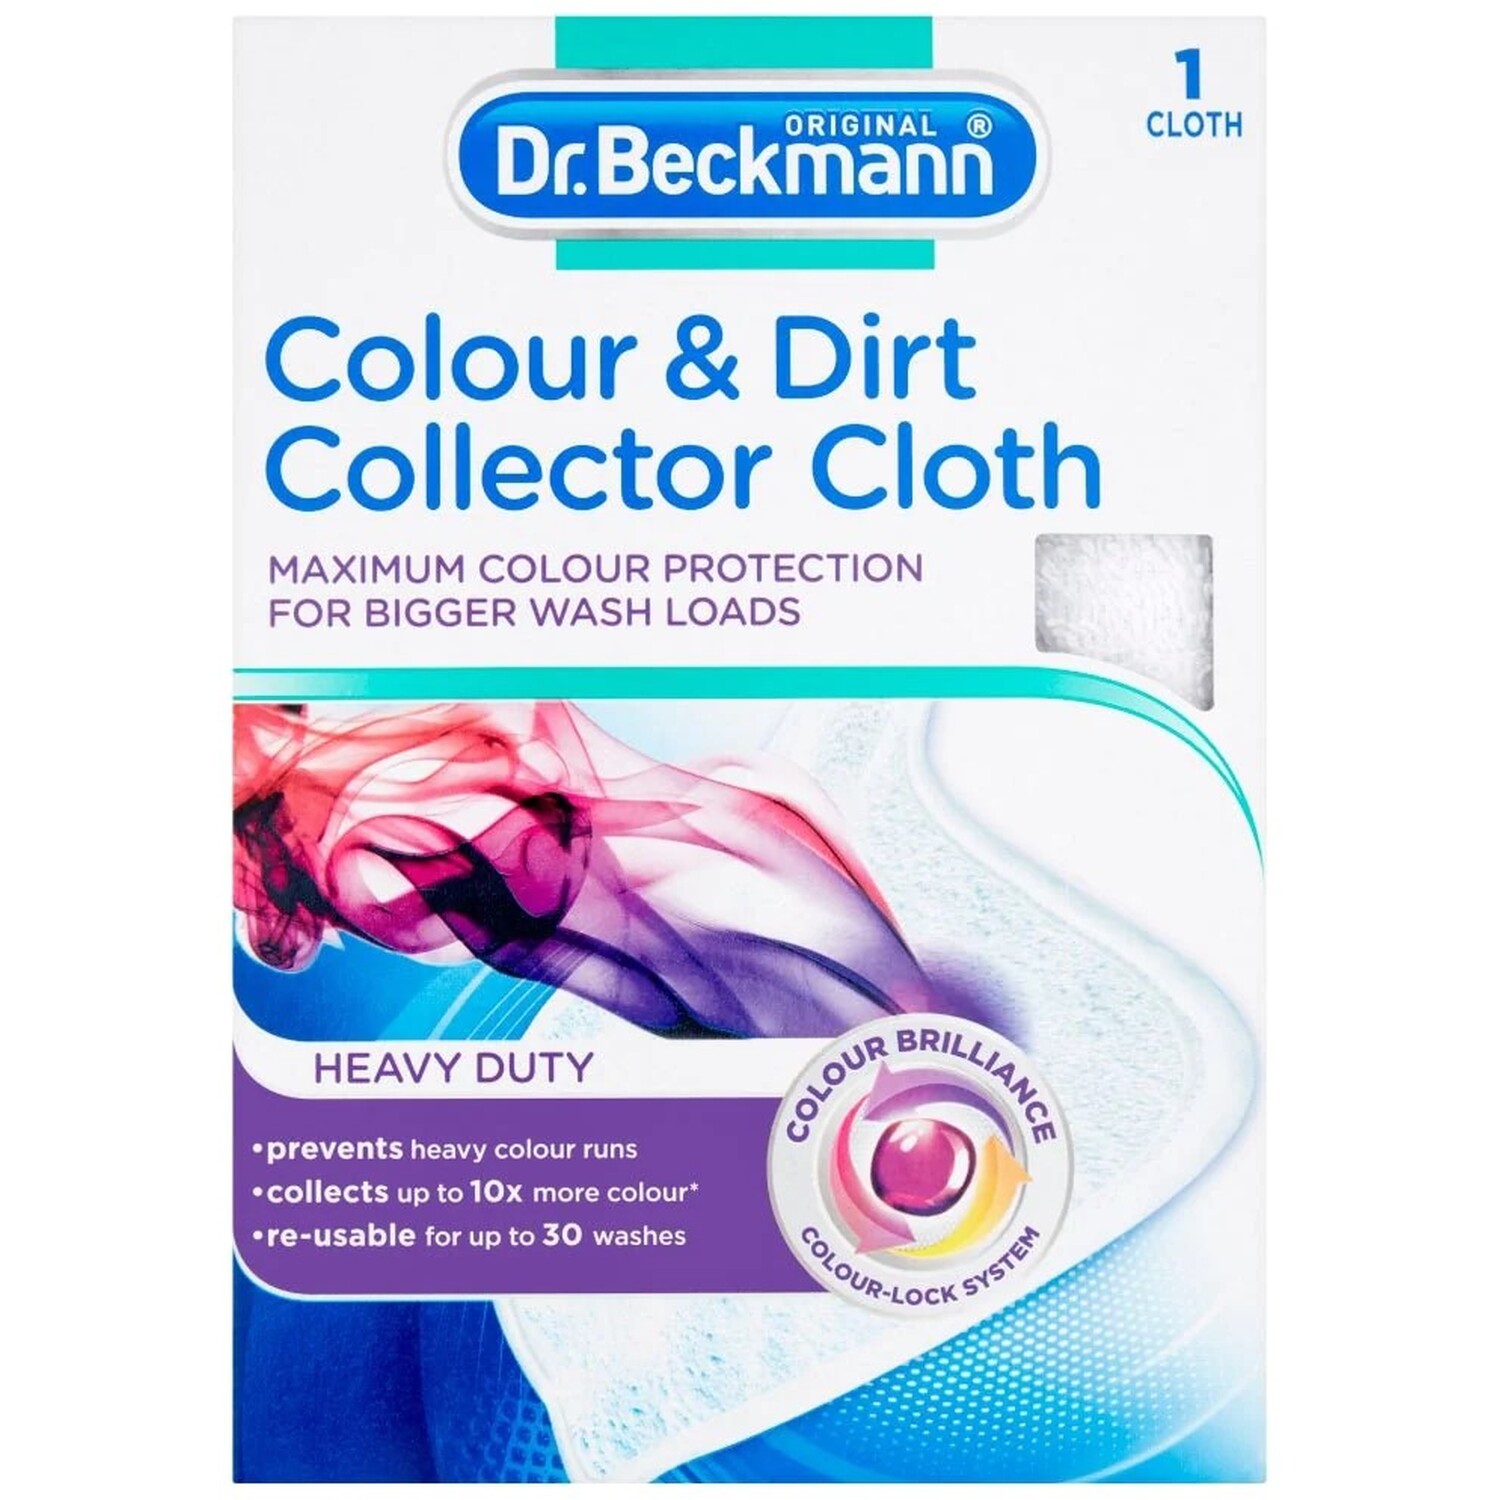 Dr Beckmann Colour and Dirt Collector Cloth Image